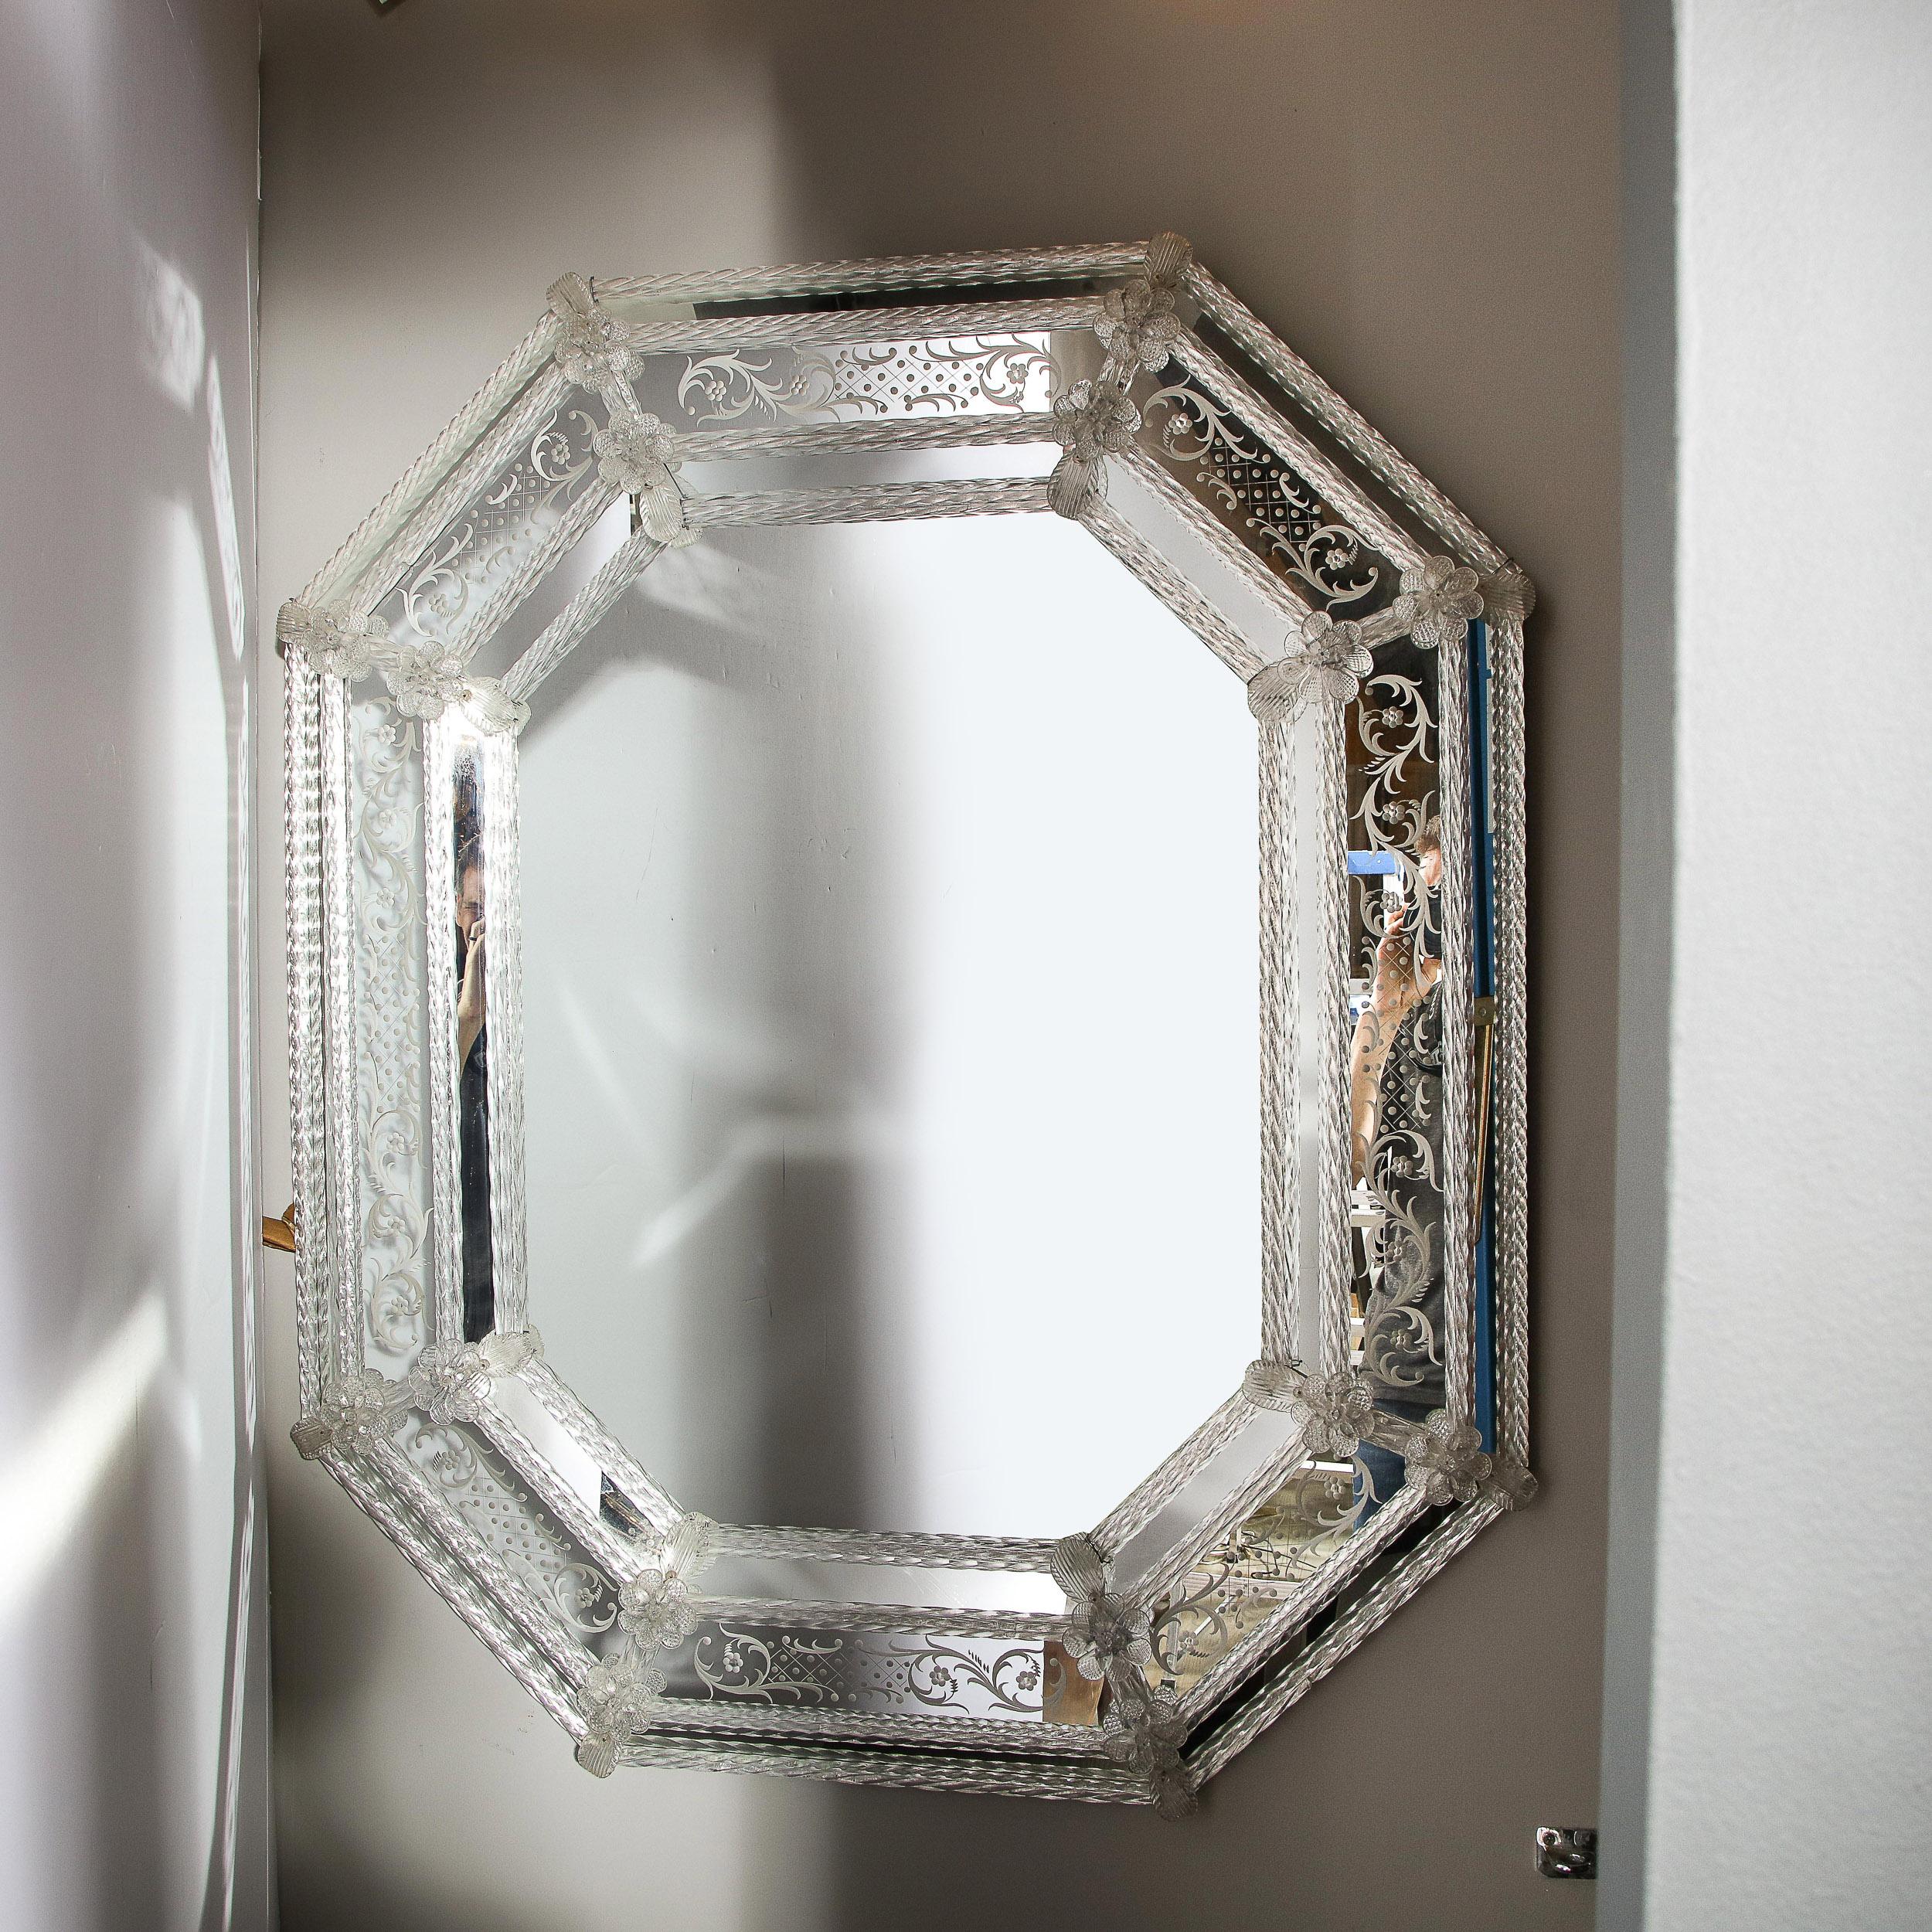 Mid-Century Modern Venetian Mirror with Murano Florets & Acid Etched Detailing 2